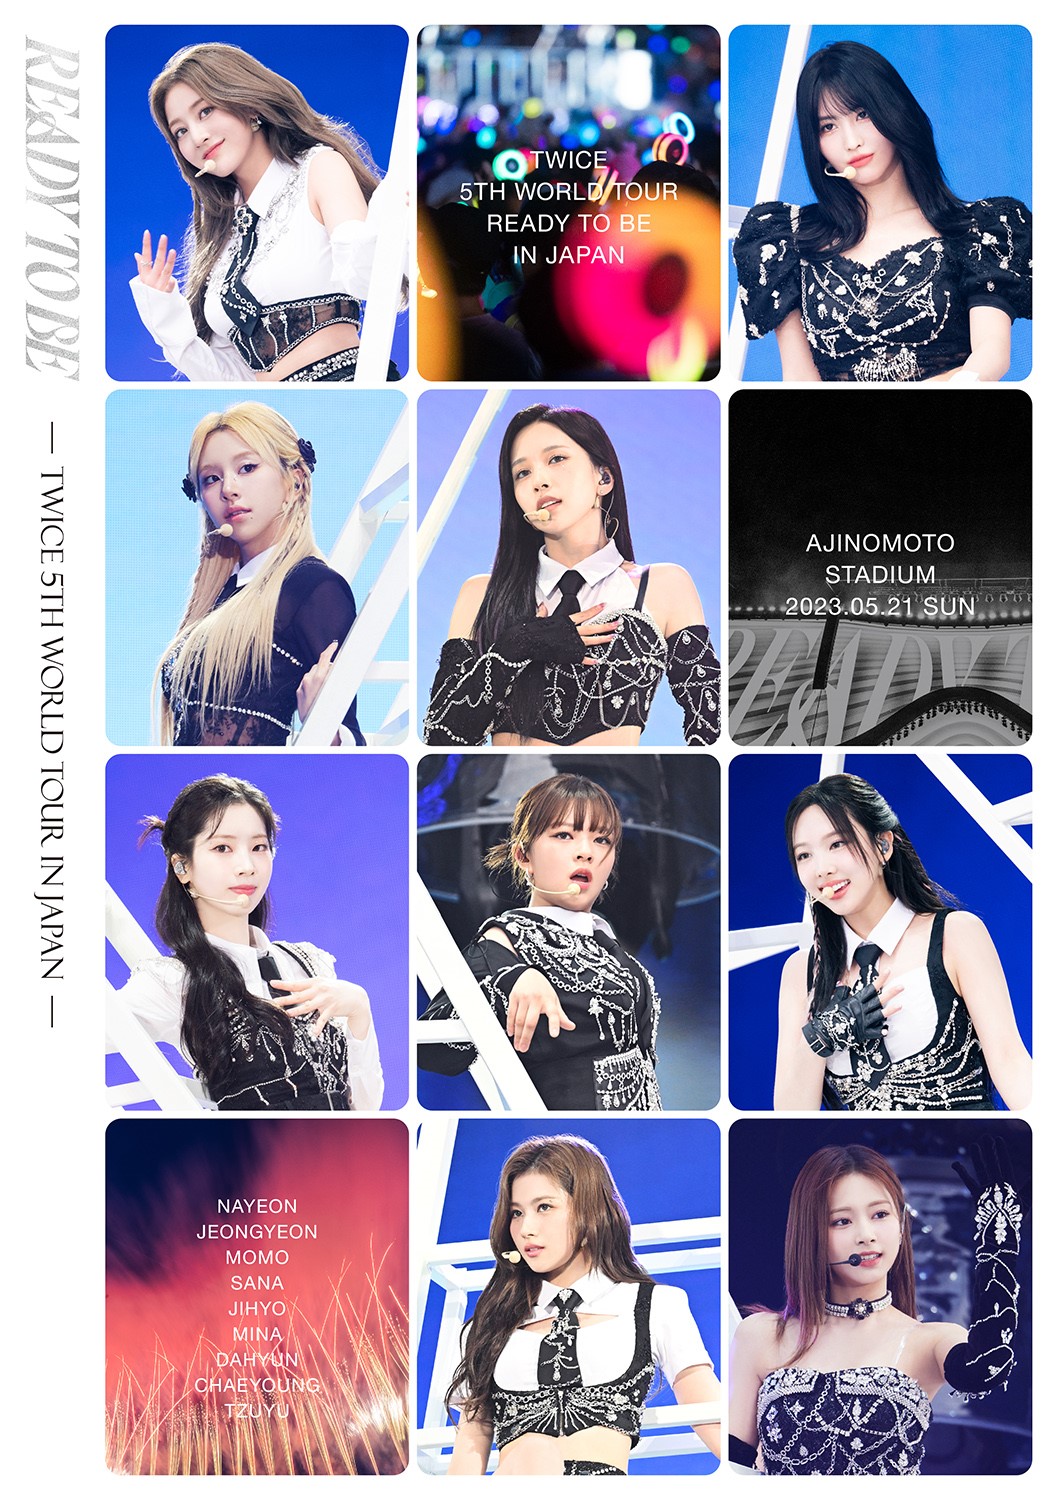 『TWICE 5TH WORLD TOUR 'READY TO BE' in JAPAN』通常盤ジャケット